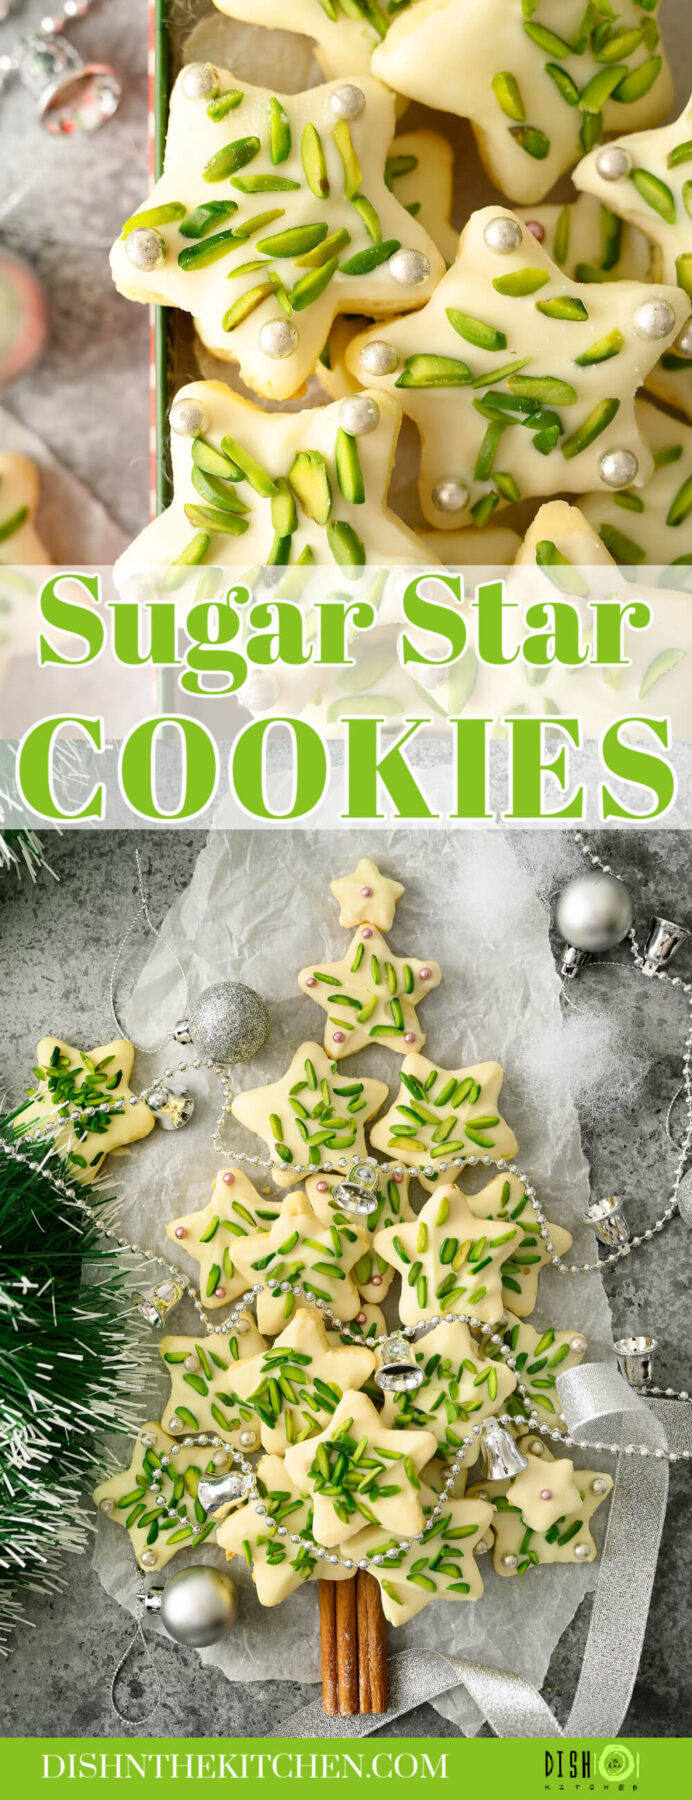 Pinterest image featuring sugar star cookies decorated with pistachios and silver dragées.